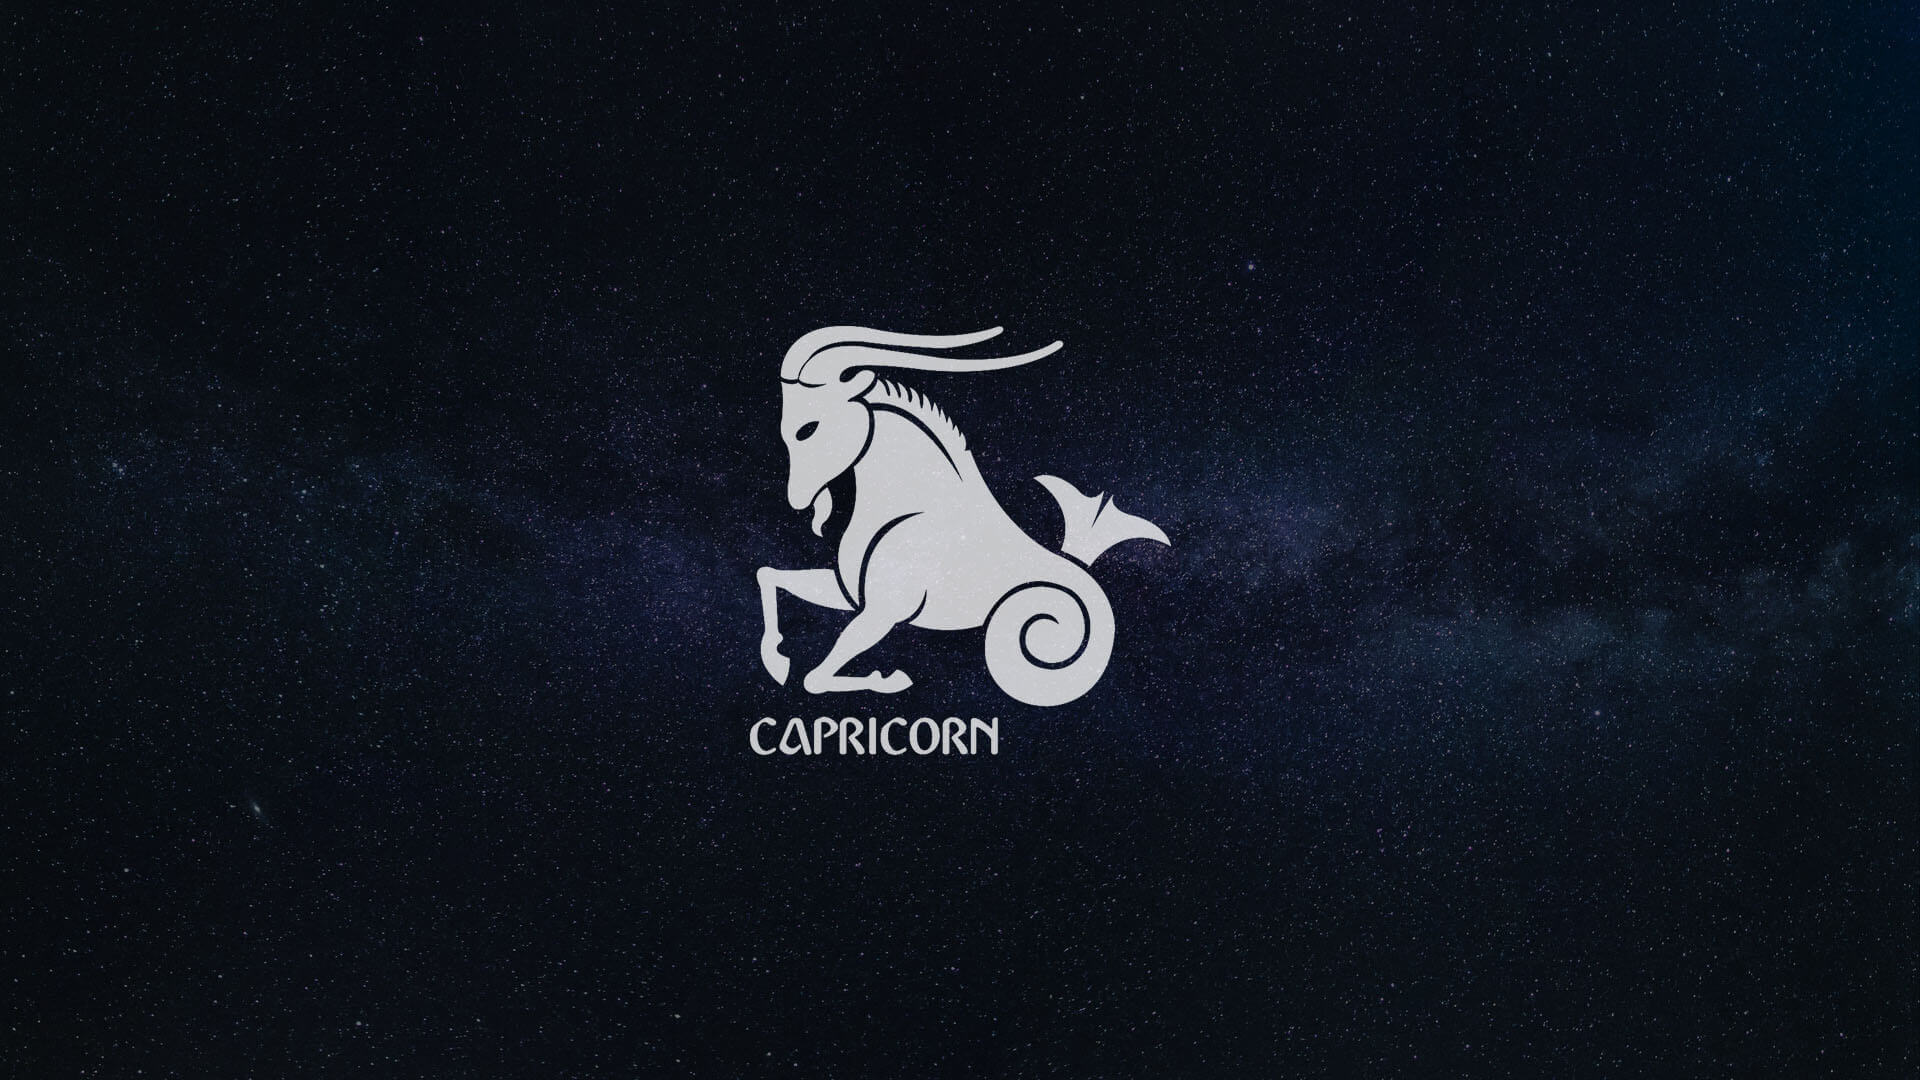 Capricorn Season 2020: a Time of Restructuring